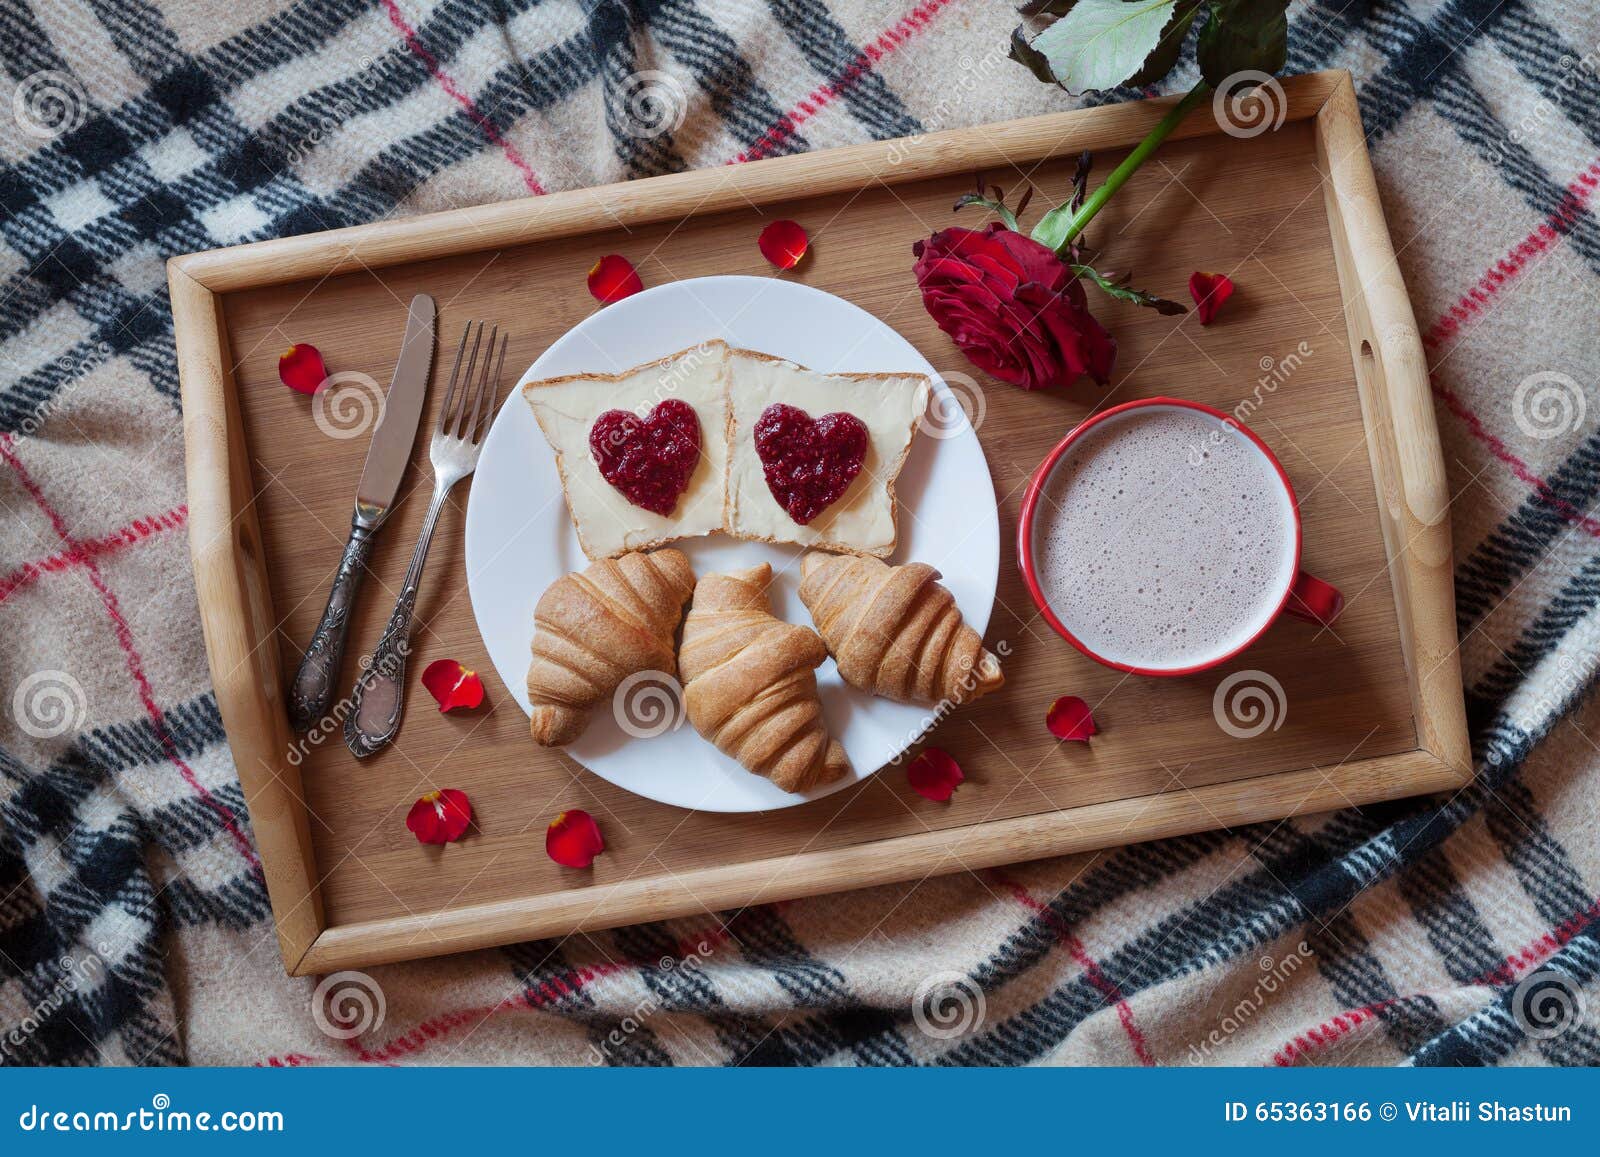 Breakfast in Bed Romantic Surprise, Toasts with Stock Photo - Image of ...